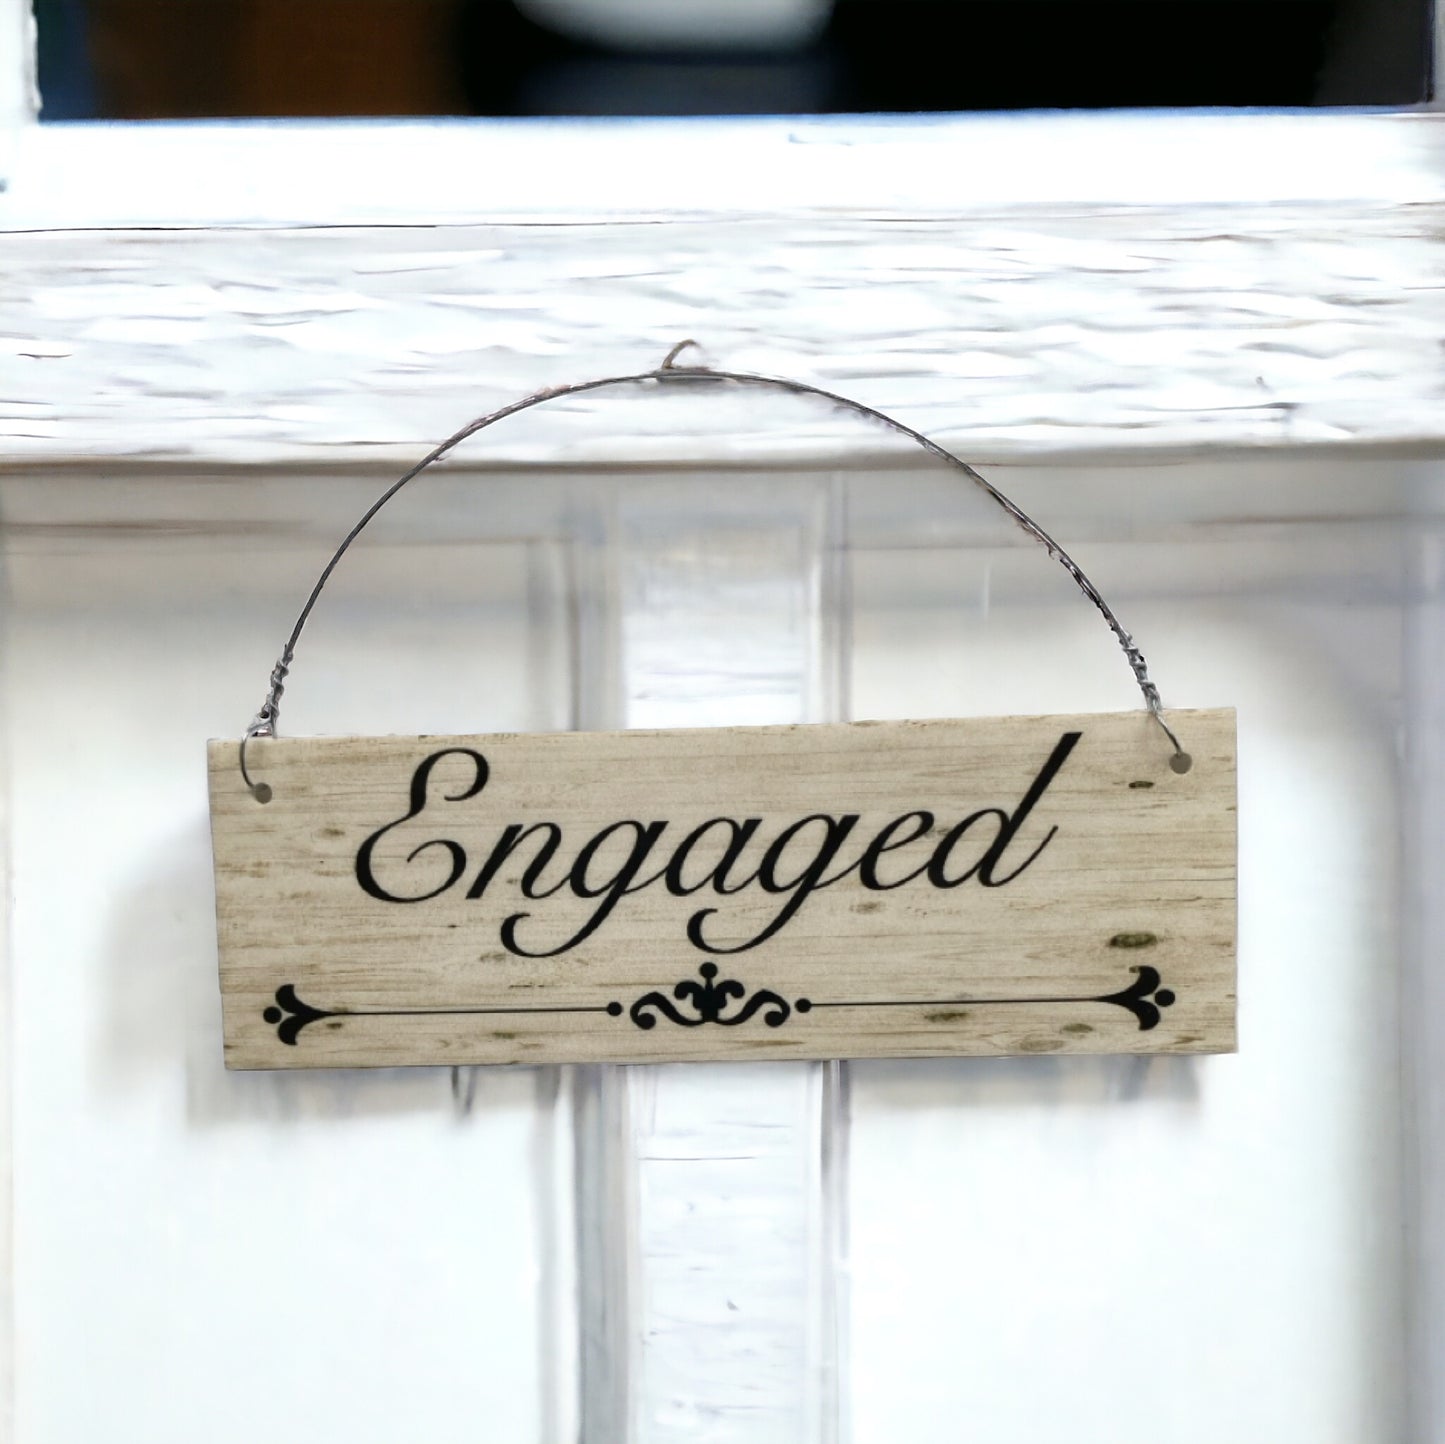 Vacant Engaged Toilet Bathroom Sign - The Renmy Store Homewares & Gifts 